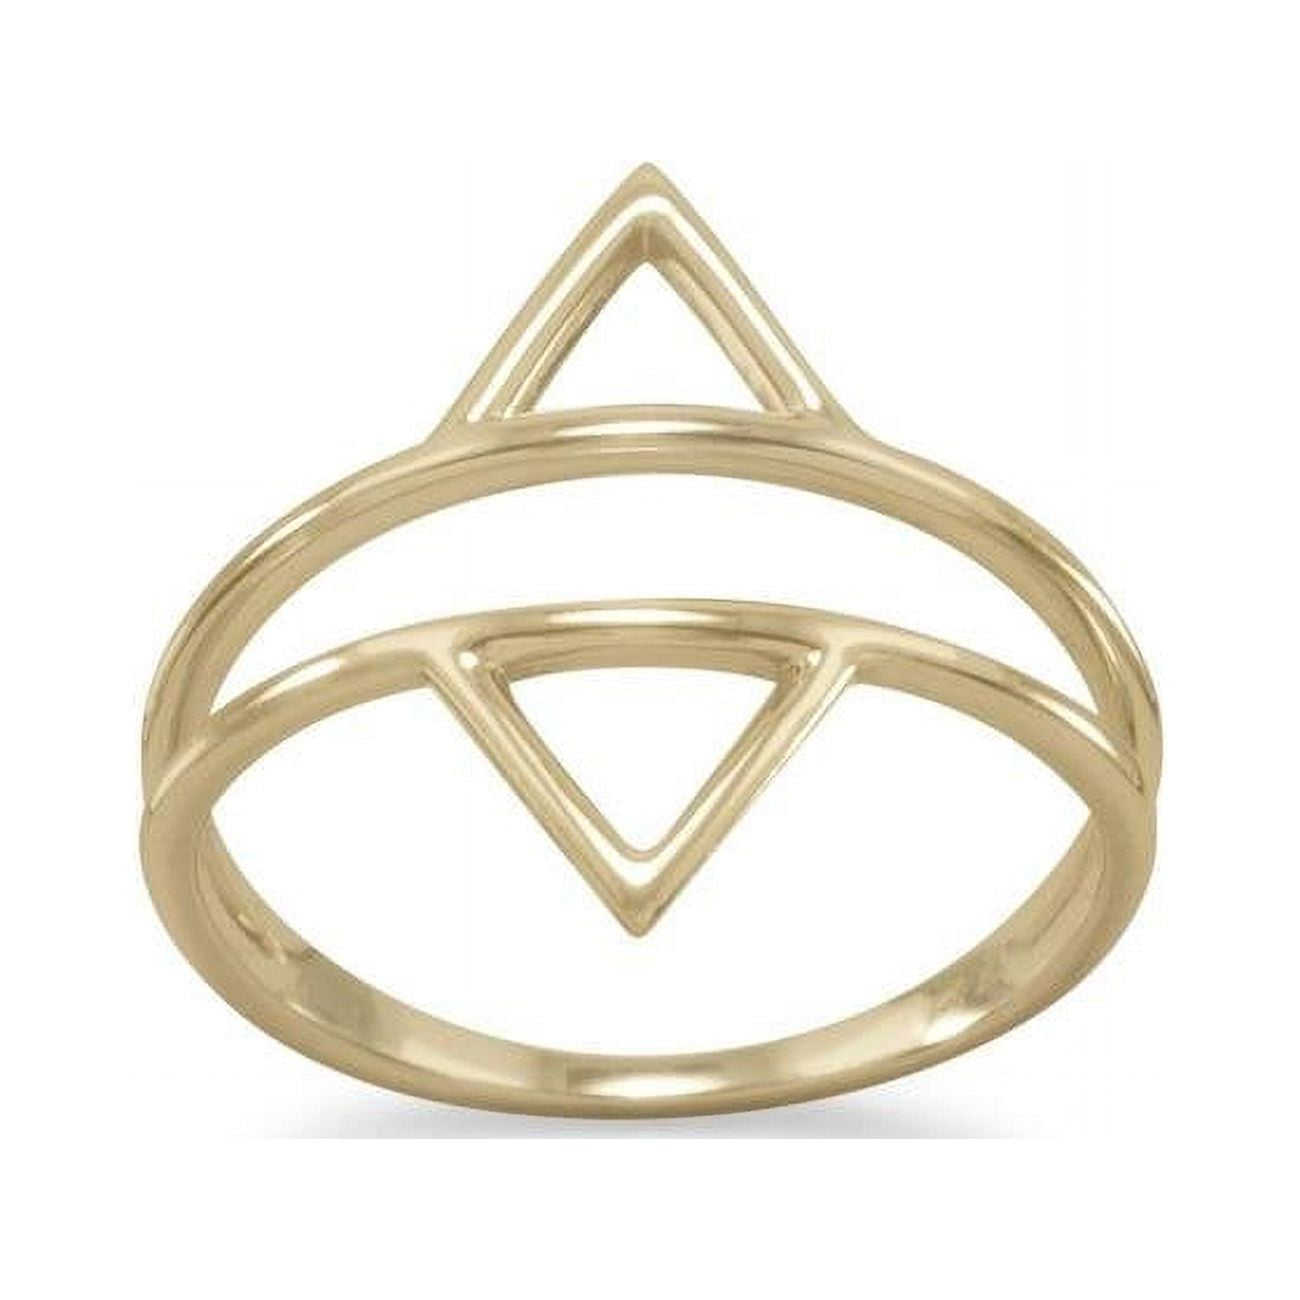 83697-7 14k Gold Plated Double Triangle Ring - Size 7